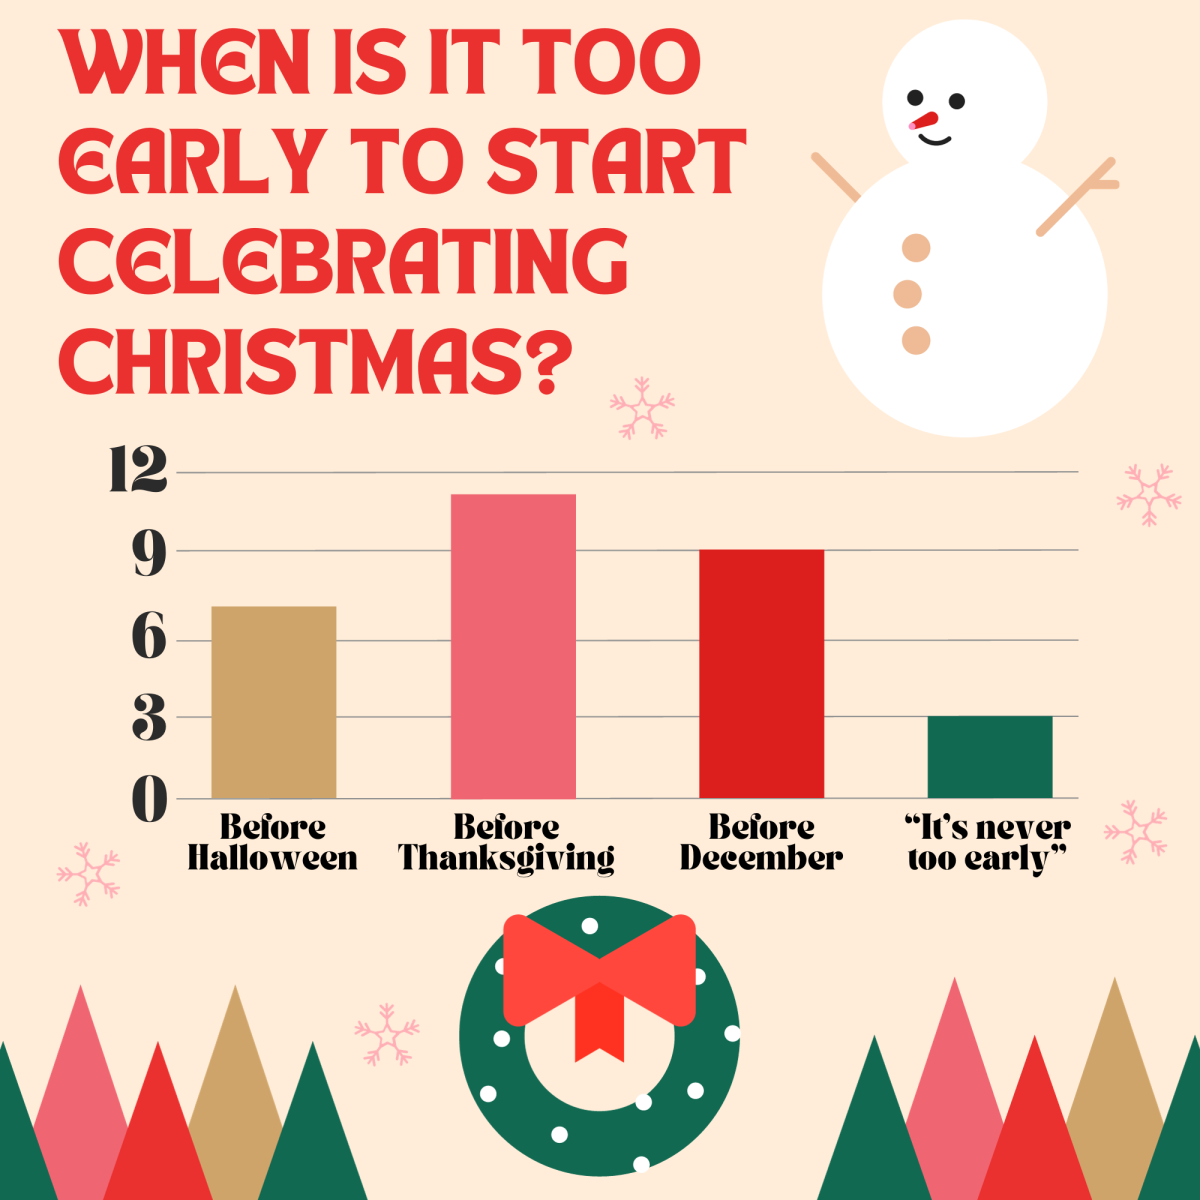 How+Early+Is+Too+Early+to+Celebrate+Christmas%3F